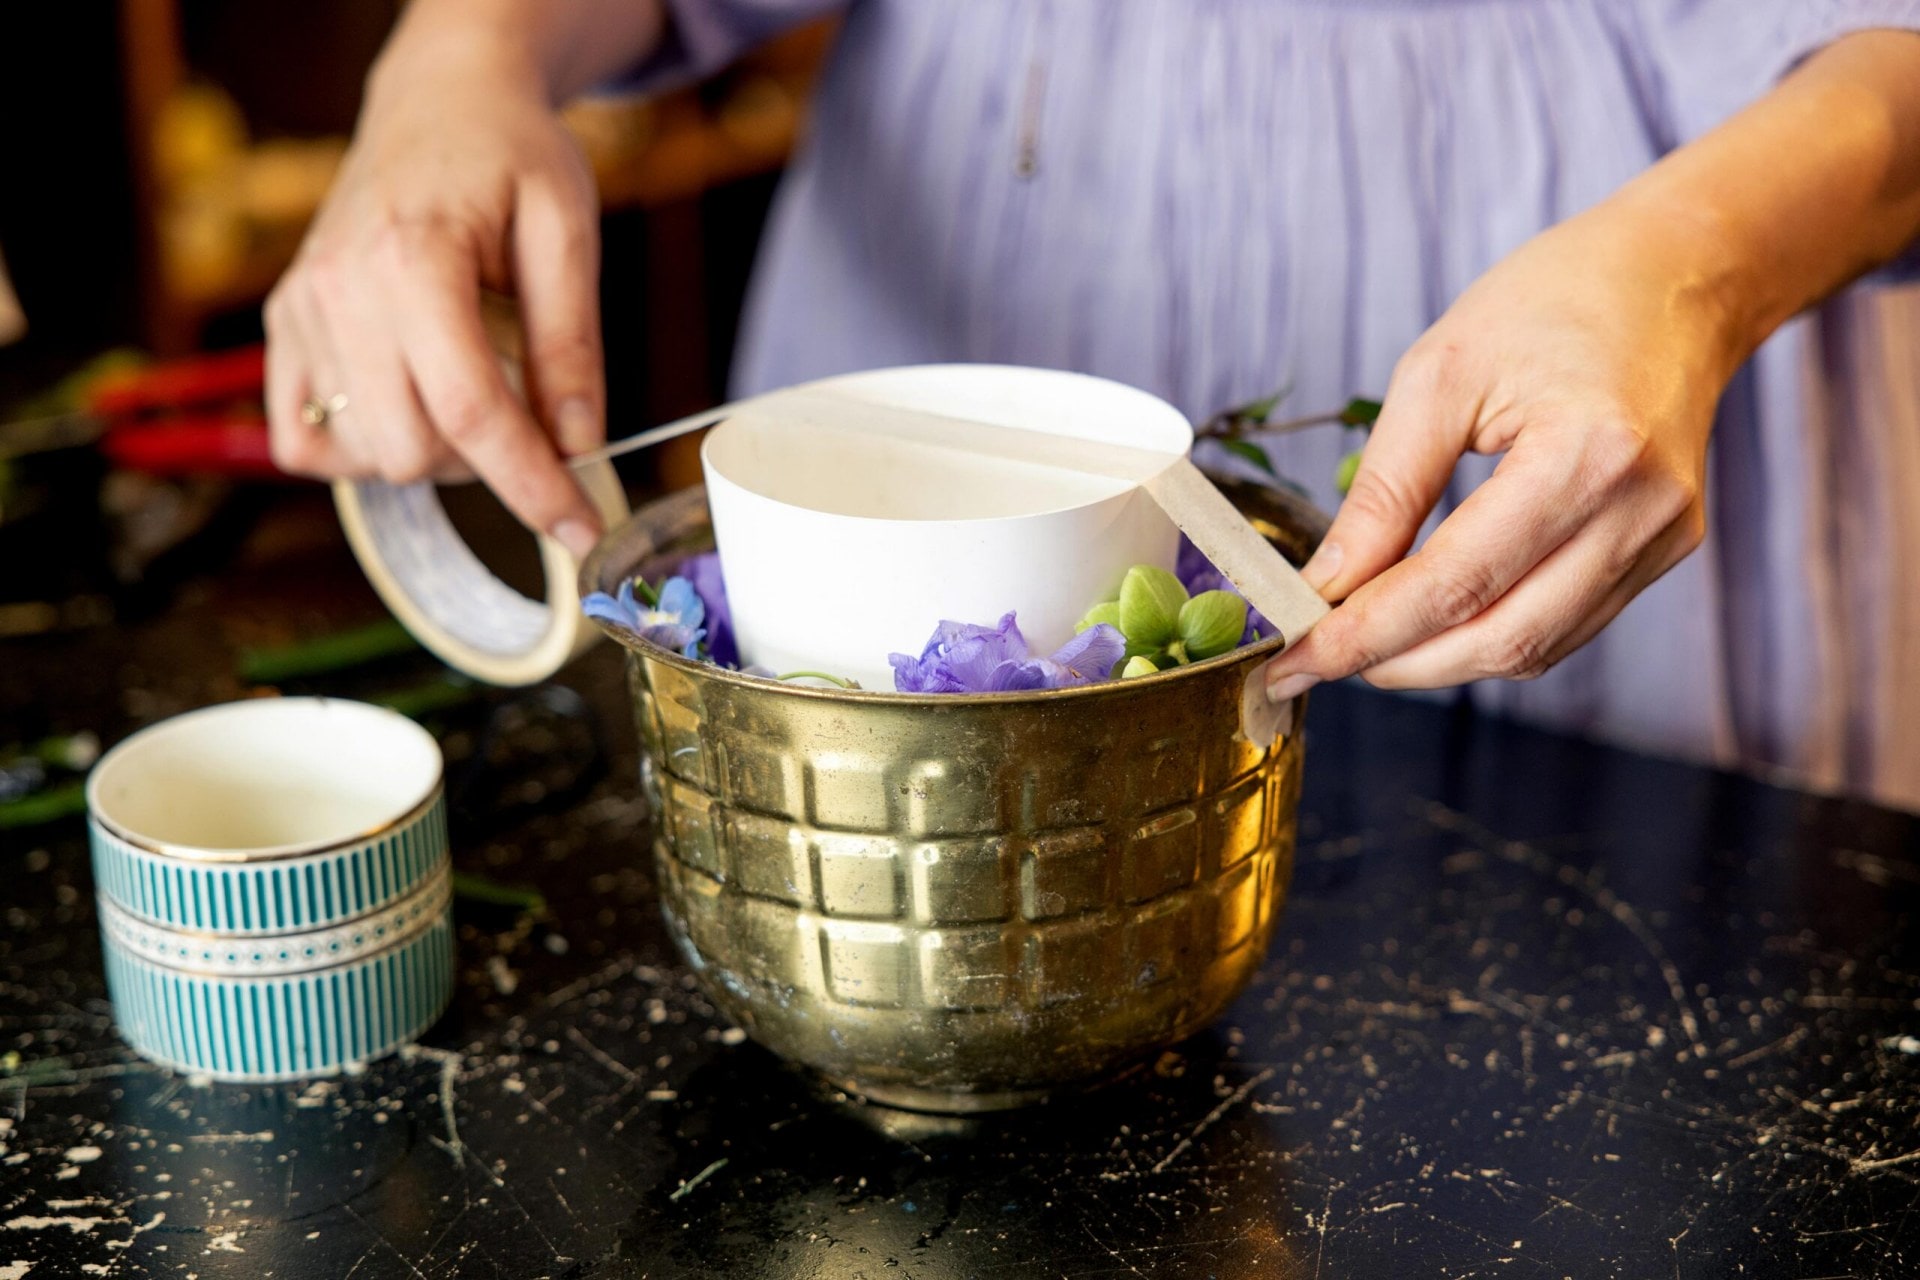 A woman in a purple dress taping a small bowl filled with rice to the larger metal bowl filled with flowers